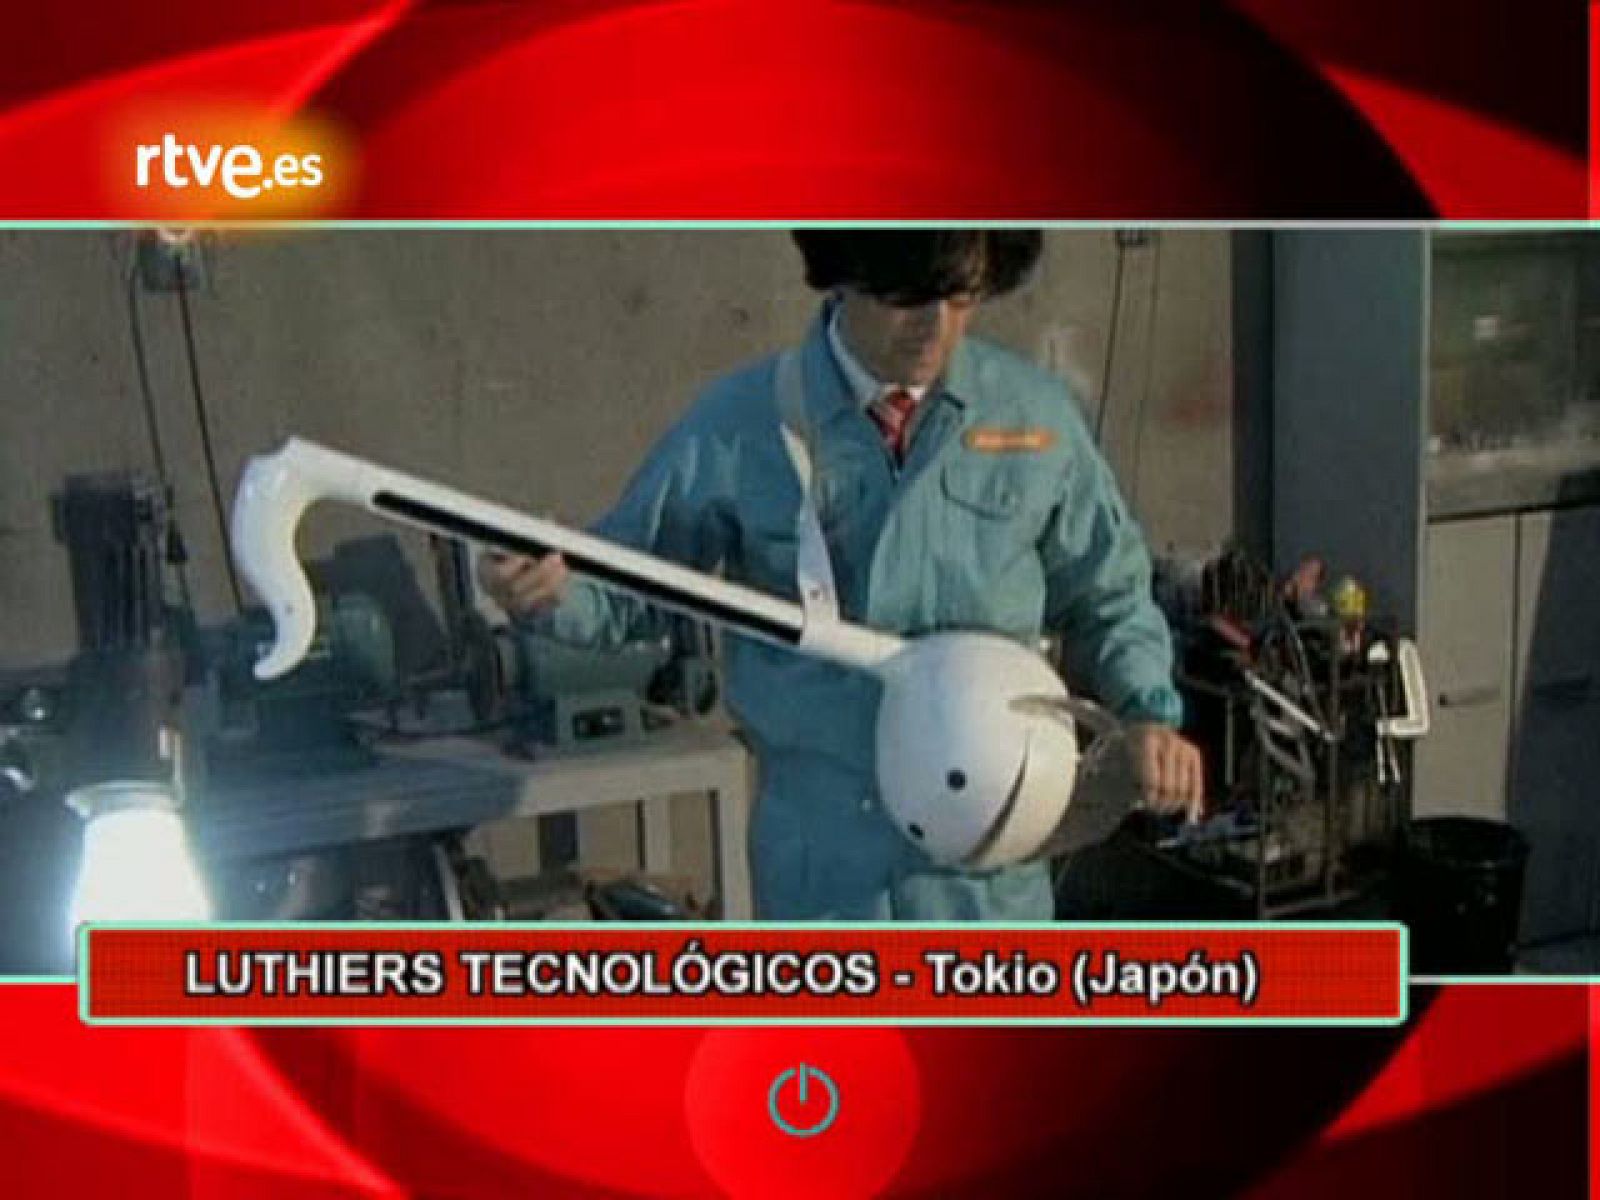 On Off: Luthiers tecnológicos